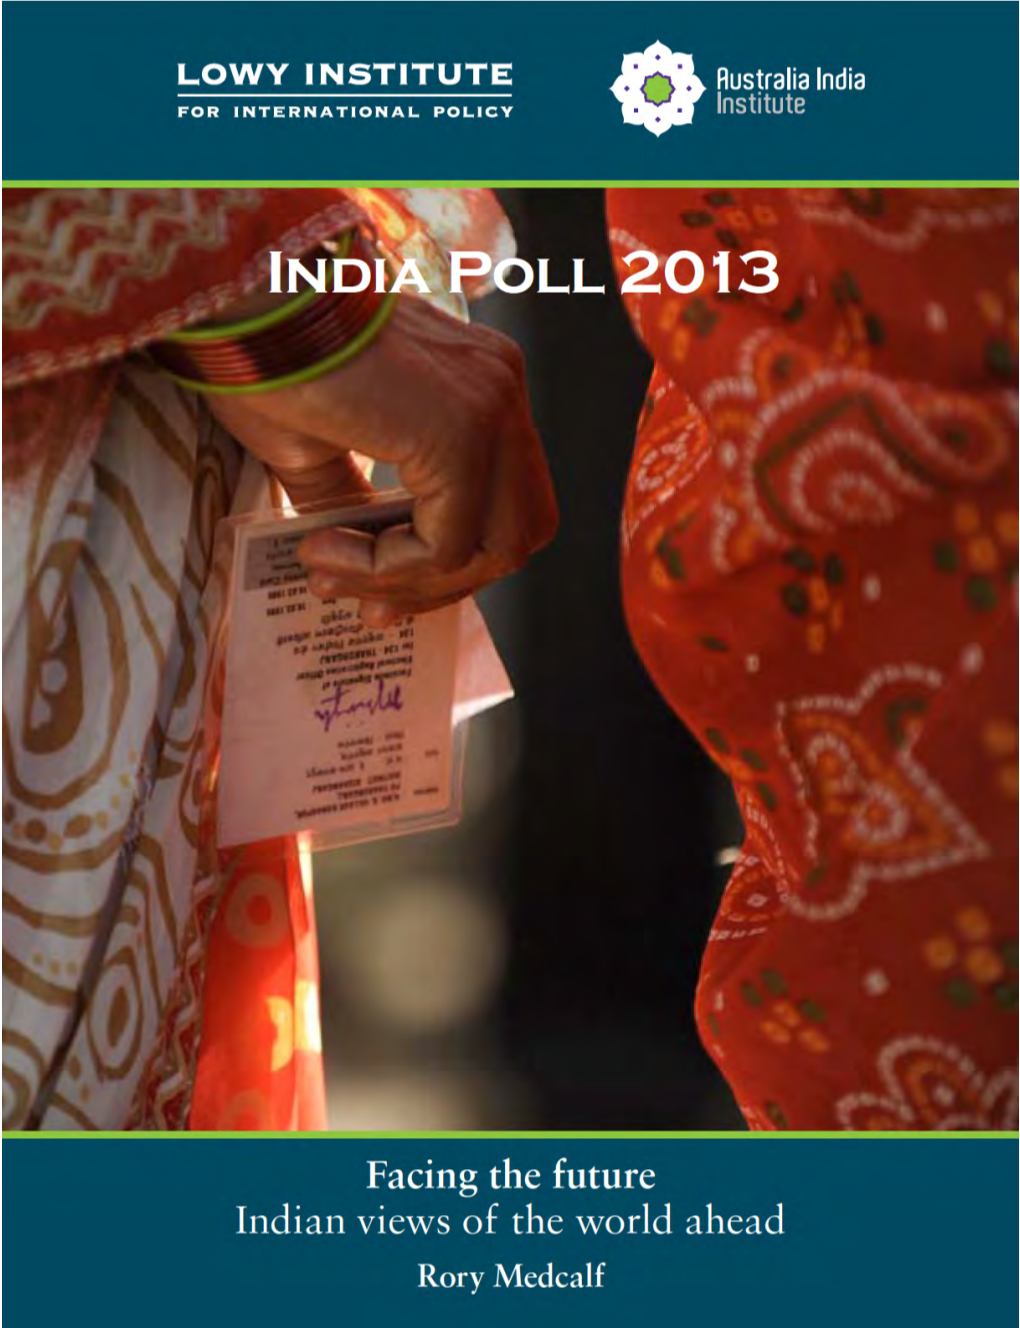 Lowy Institute India Poll 2013